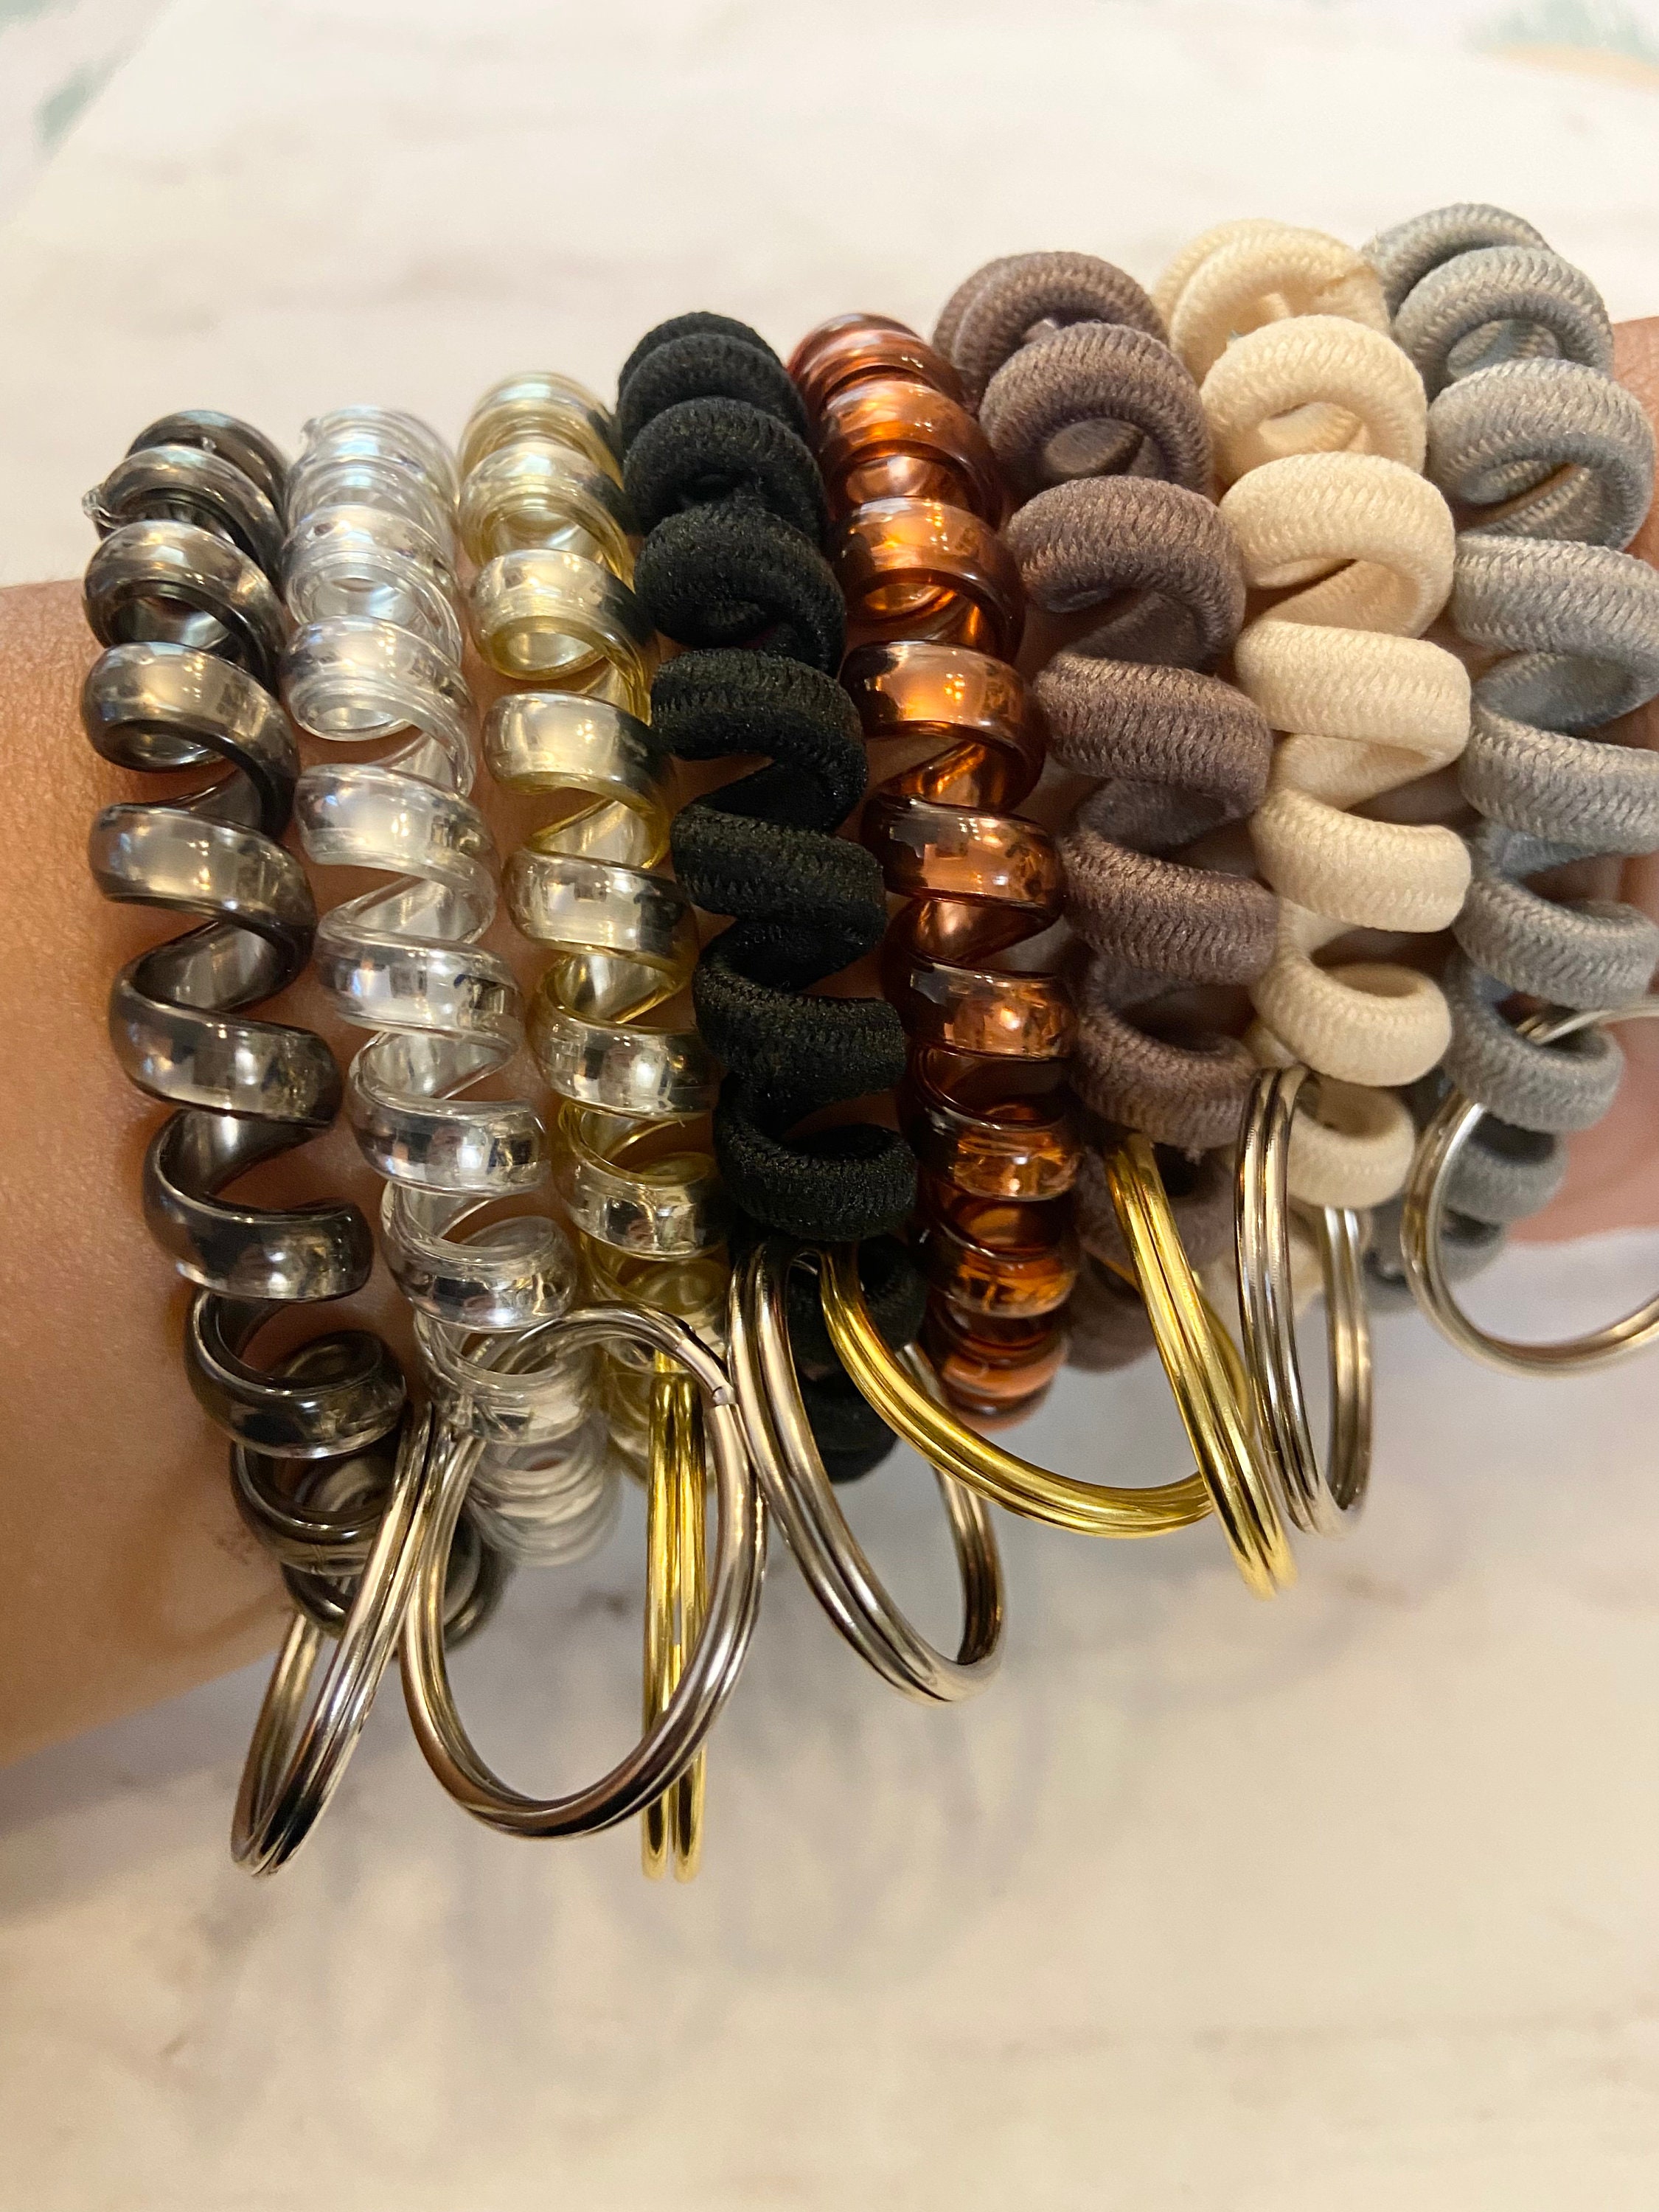 Candy Color Free Samples Color Zipper Phone Cord Hair Tie Storage Box Color  Frosted Cable Tie Cute Cable - China Spiral Hair Ties and Telephone Wire  Hair price